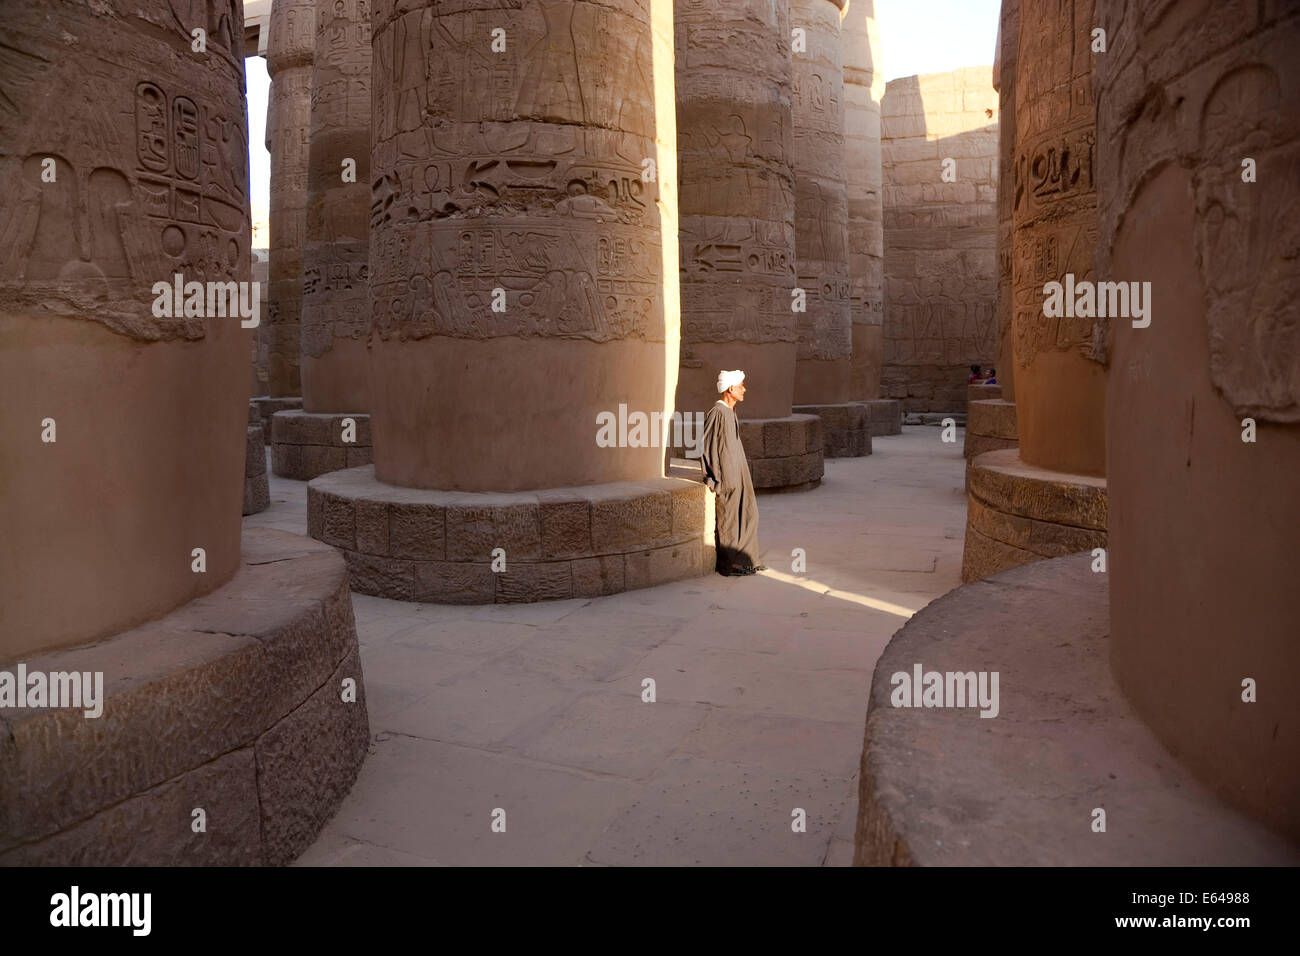 Egypt, Luxor, Karnak, The Great Temple of Amun, Great Hypostyle Hall. Man in traditional dress. Stock Photo